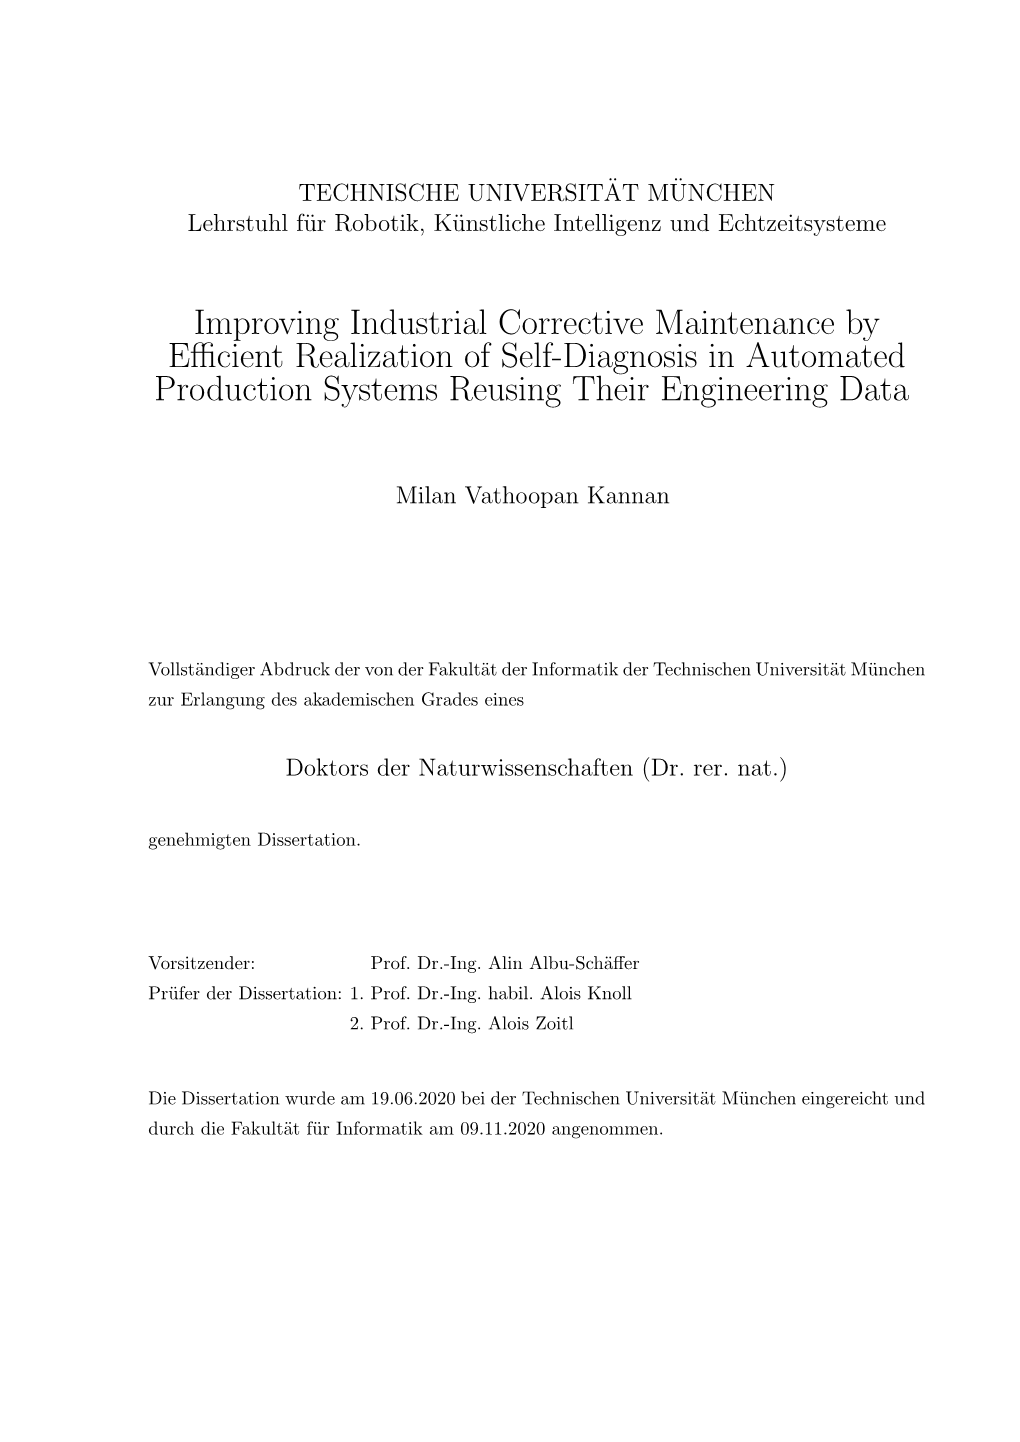 Improving Industrial Corrective Maintenance by Efficient